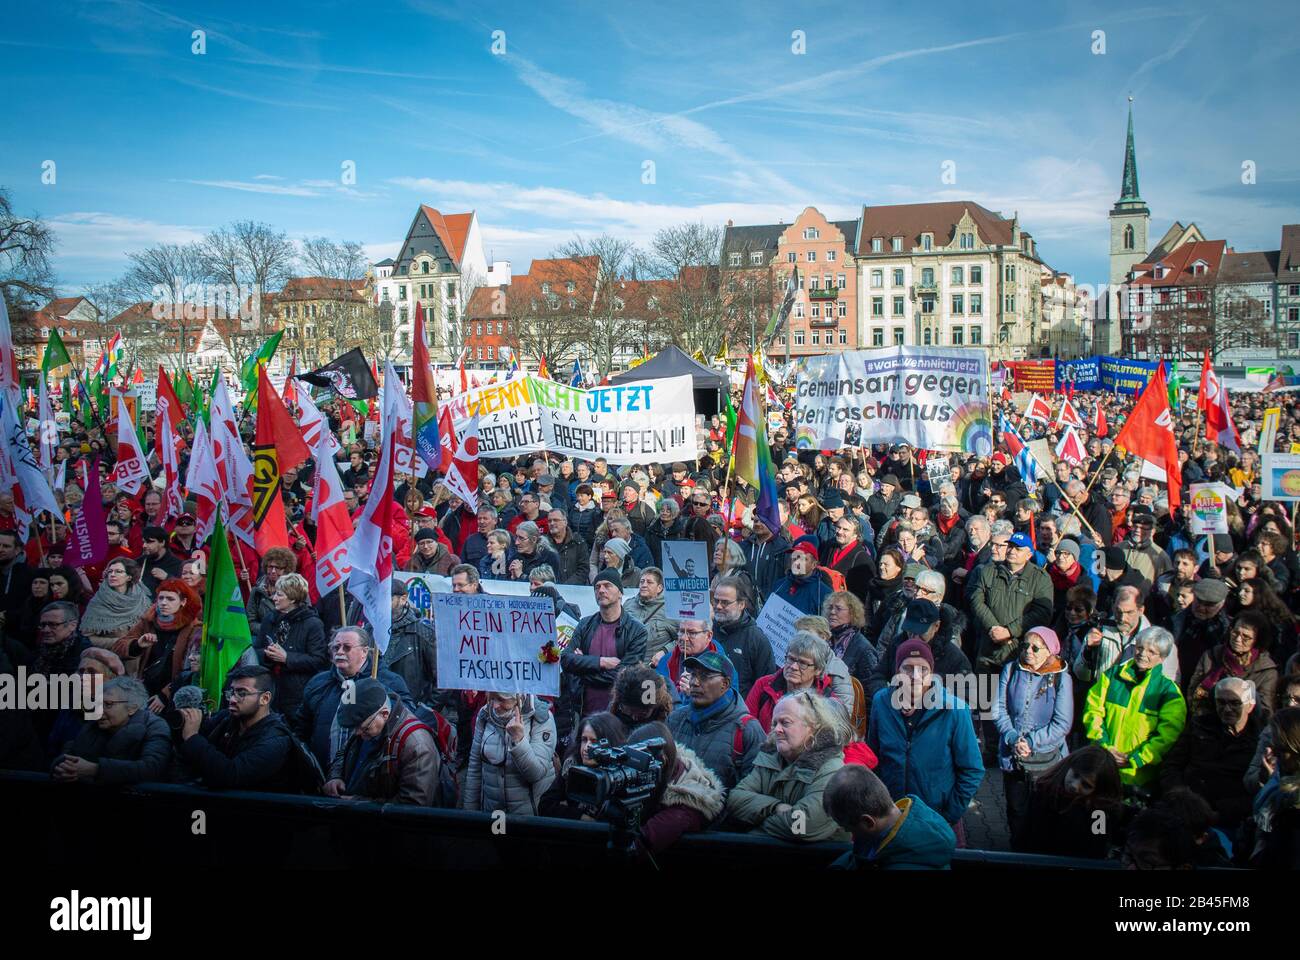 Demonstration in Erfurt against the collaboration of the CDU, FDP and AfD to elect a regional prime minister in Thuringia. Stock Photo